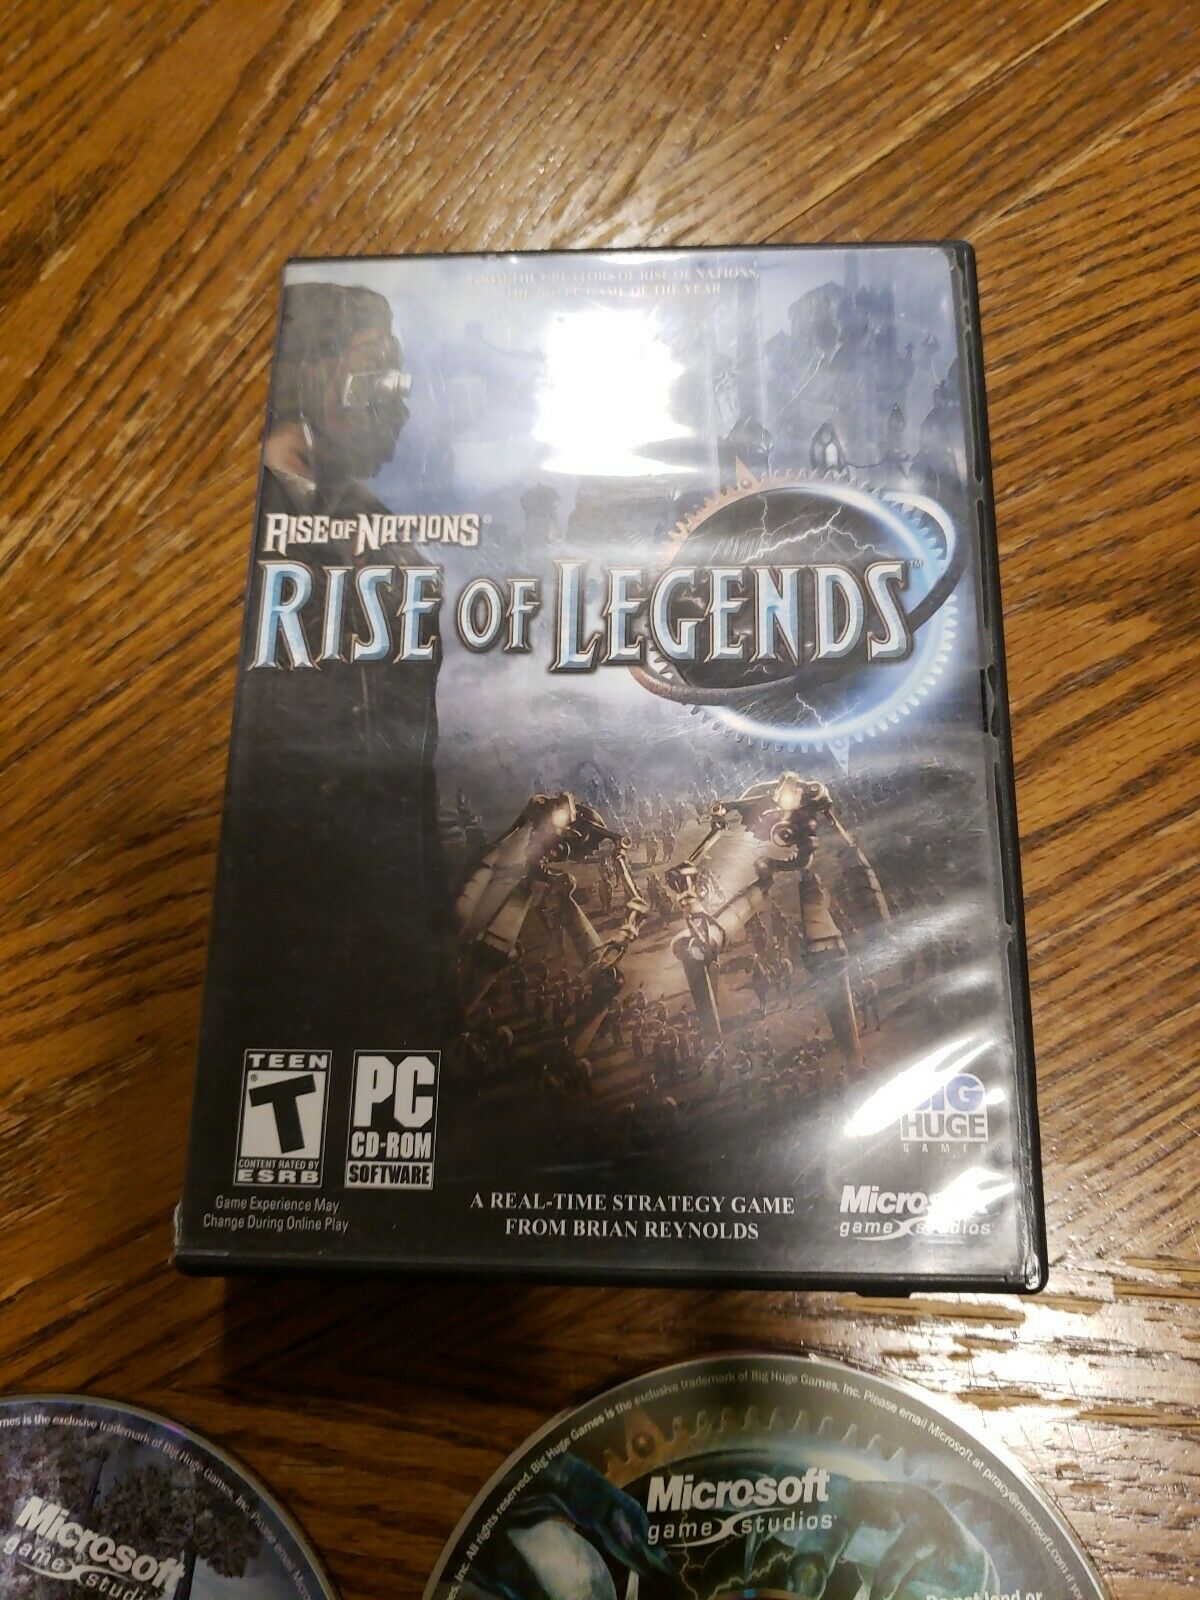 Rise of nations rise of legends cd key generator free